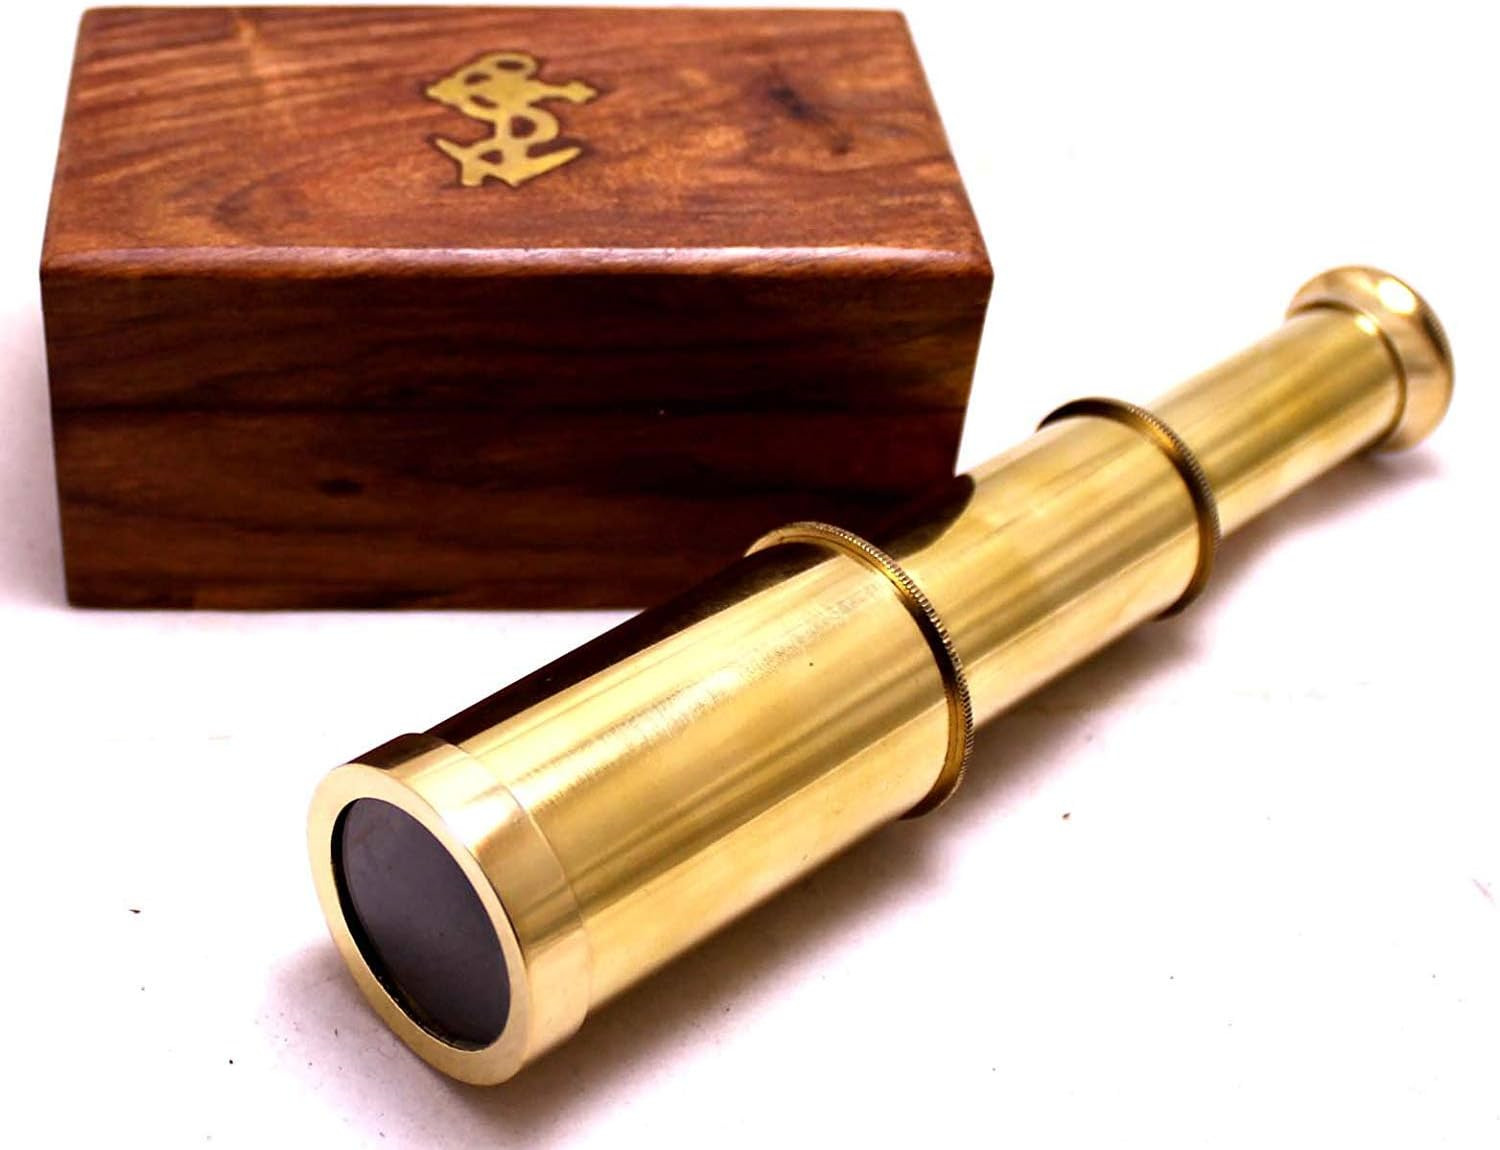 Captains 6 Brass Handheld Mini Telescope with Wooden Box Nautical Collectibles